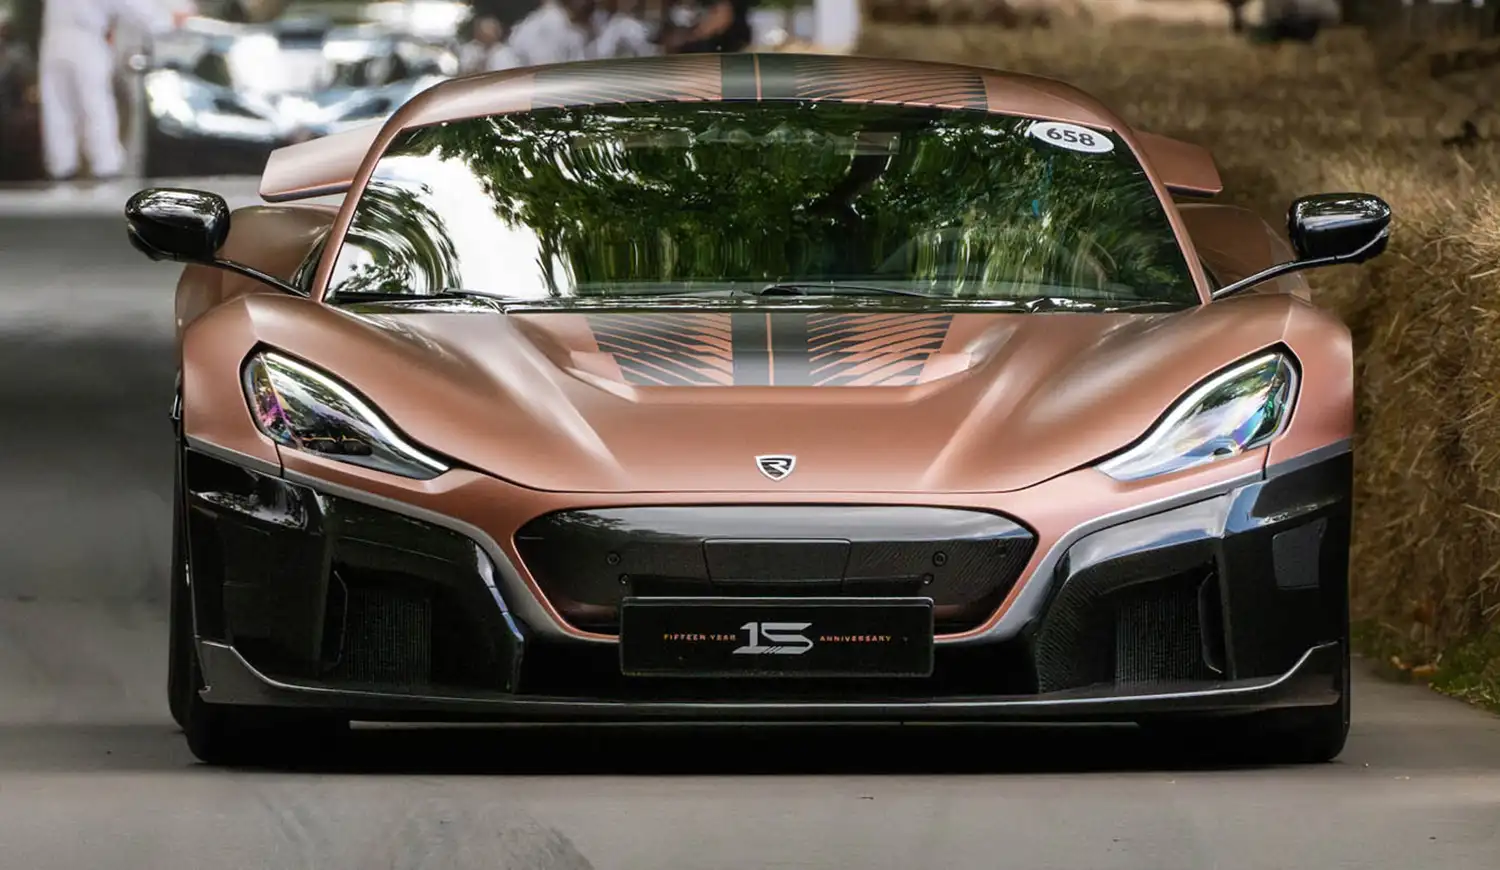 Rimac Celebrates 15 Years at Goodwood Festival of Speed